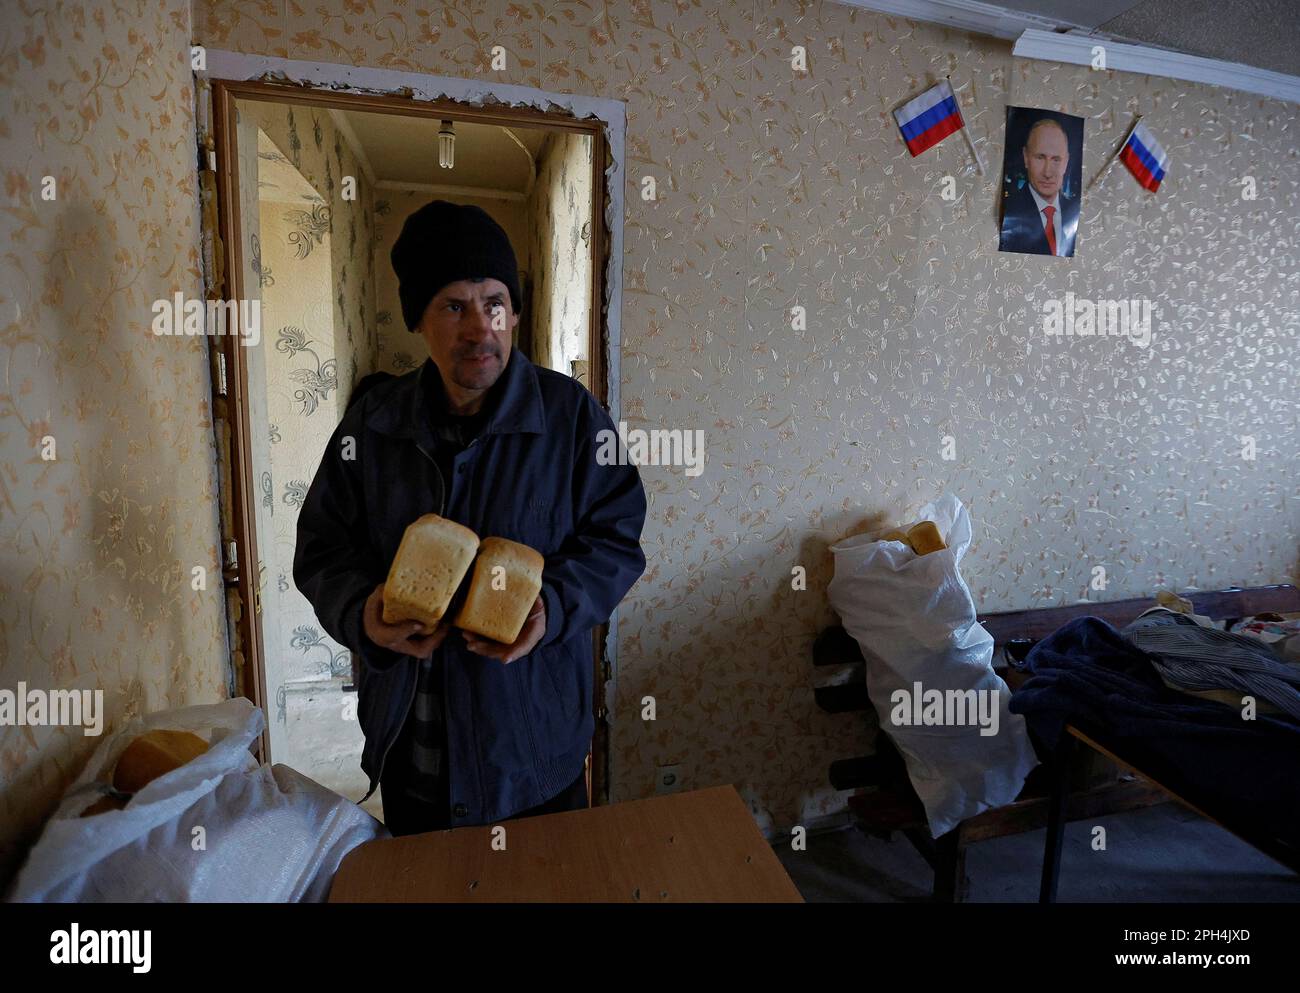 Local resident Nikolai holds bread delivered by volunteers, by a wall with a portrait of Russian President Vladimir Putin, in the course of Russia-Ukraine conflict in the settlement of Toshkivka, in the Luhansk region, Russian-controlled Ukraine, March 24, 2023. REUTERS/Alexander Ermochenko Stock Photo